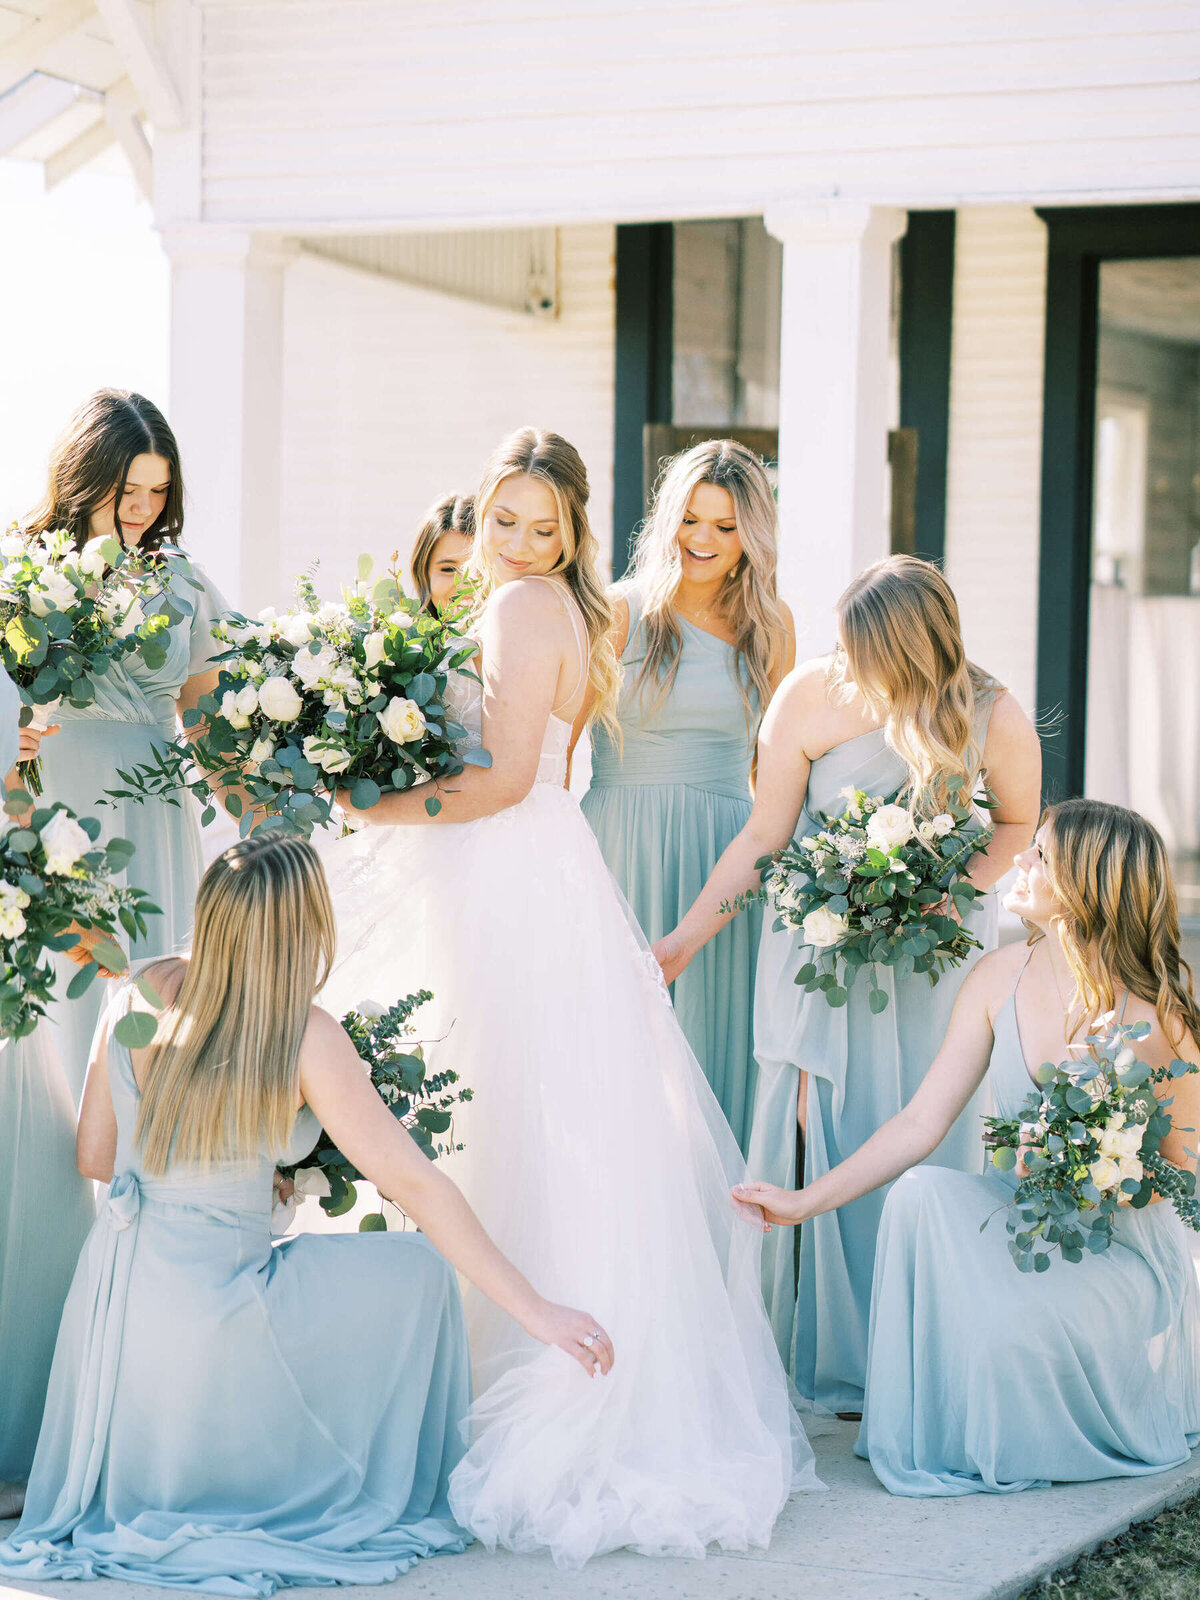 Bridesmaids in light green dresses fluff bride's tulle gown